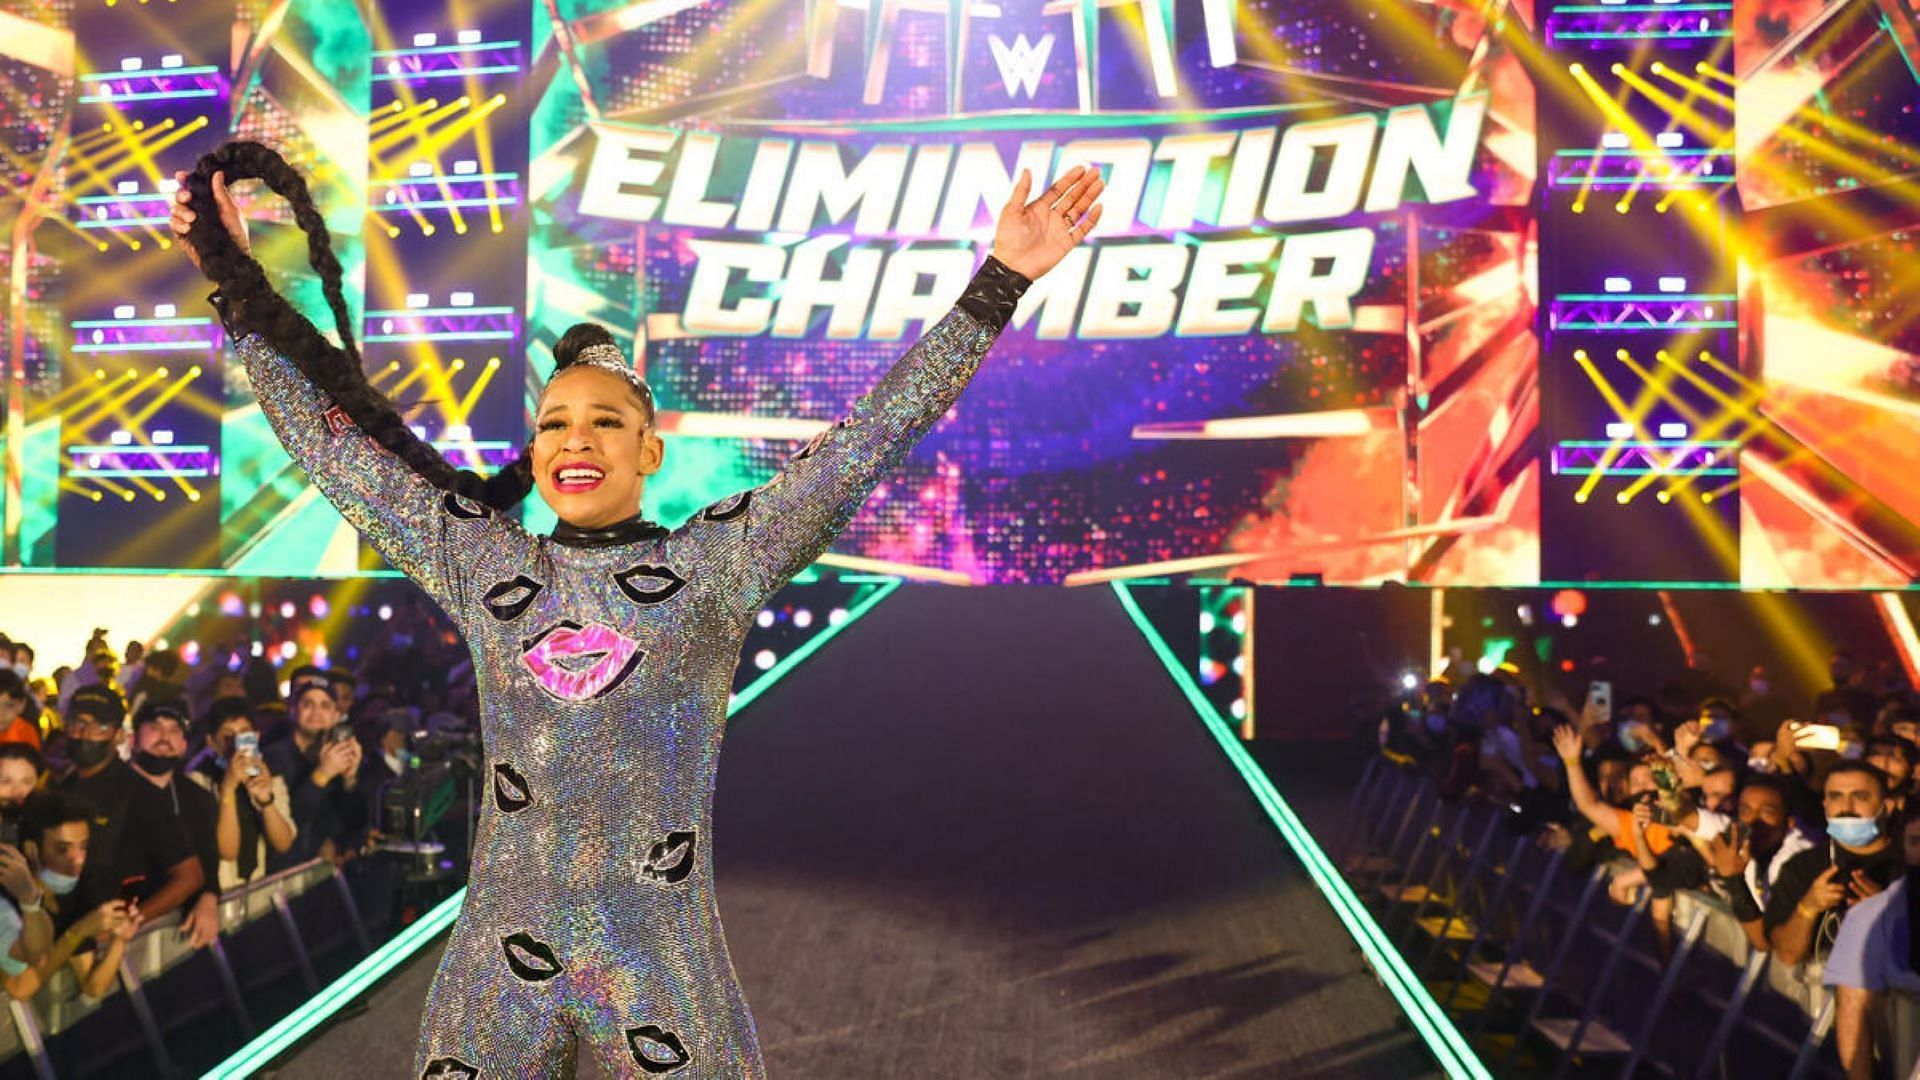 Bianca Belair won the Chamber match in 2022.